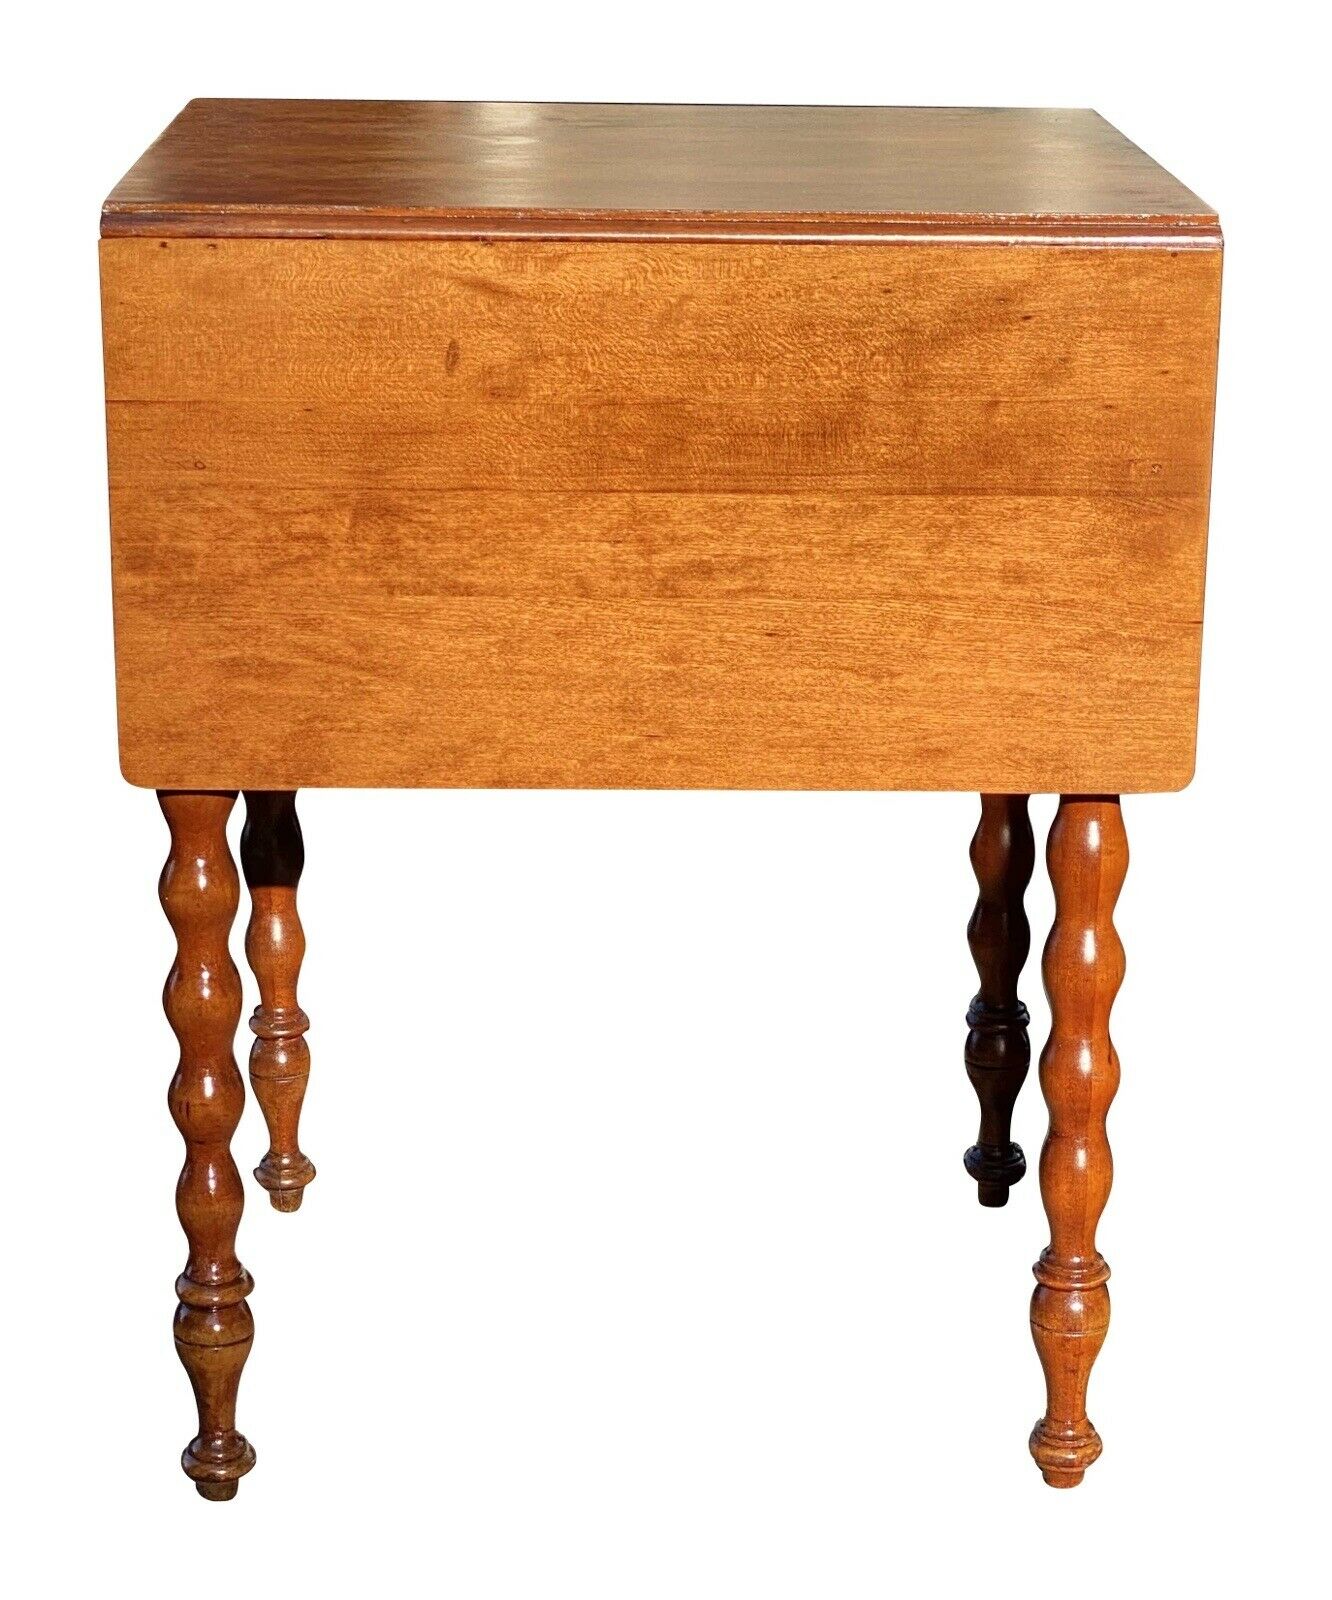 19th C Antique Sheraton Cherry Drop Leaf Work Table / Night Stand